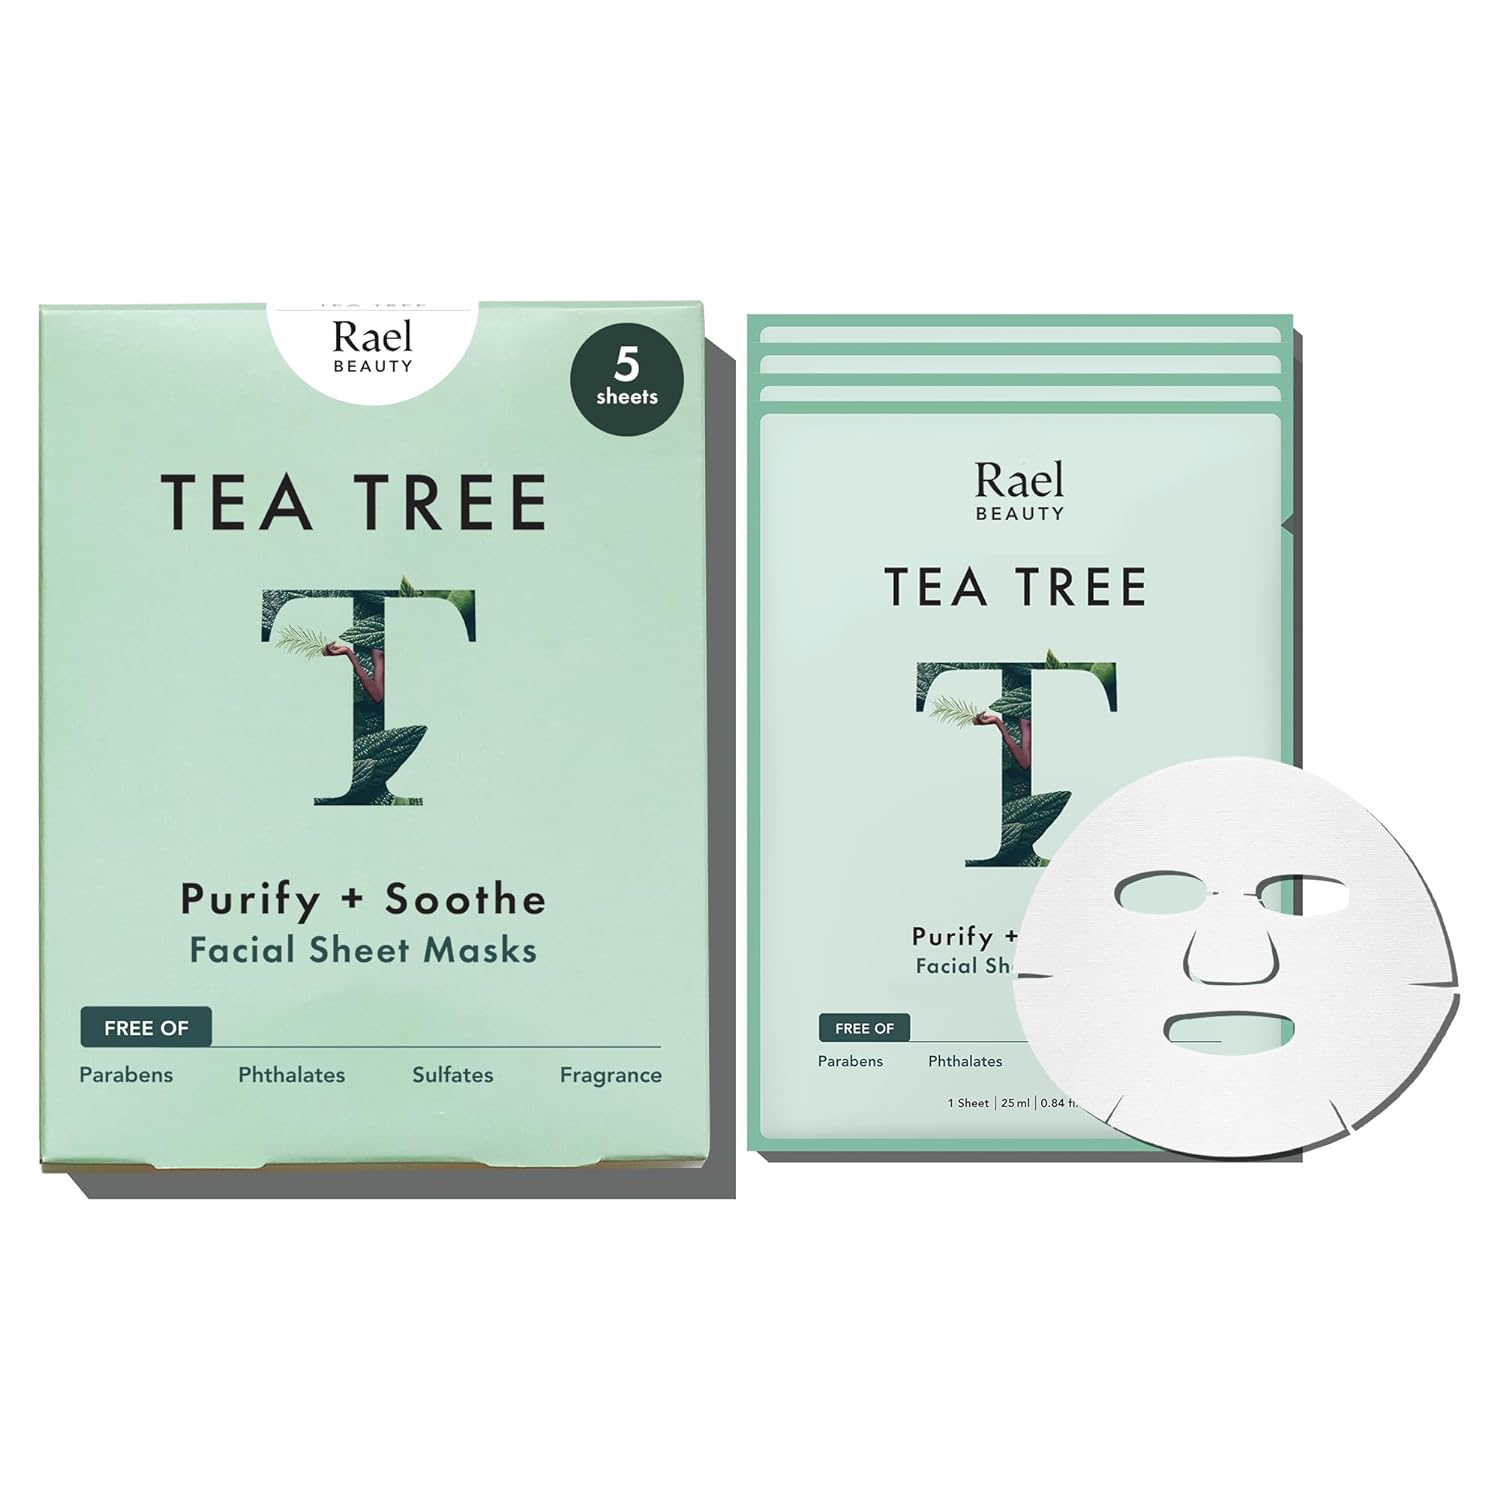 Rael Face Mask Skin Care, Tea Tree Face Masks - Bamboo Facial Sheet Mask with Tea Tree Oil and Fruit Extracts, All Skin Types (Tea Tree, 5 Sheets)